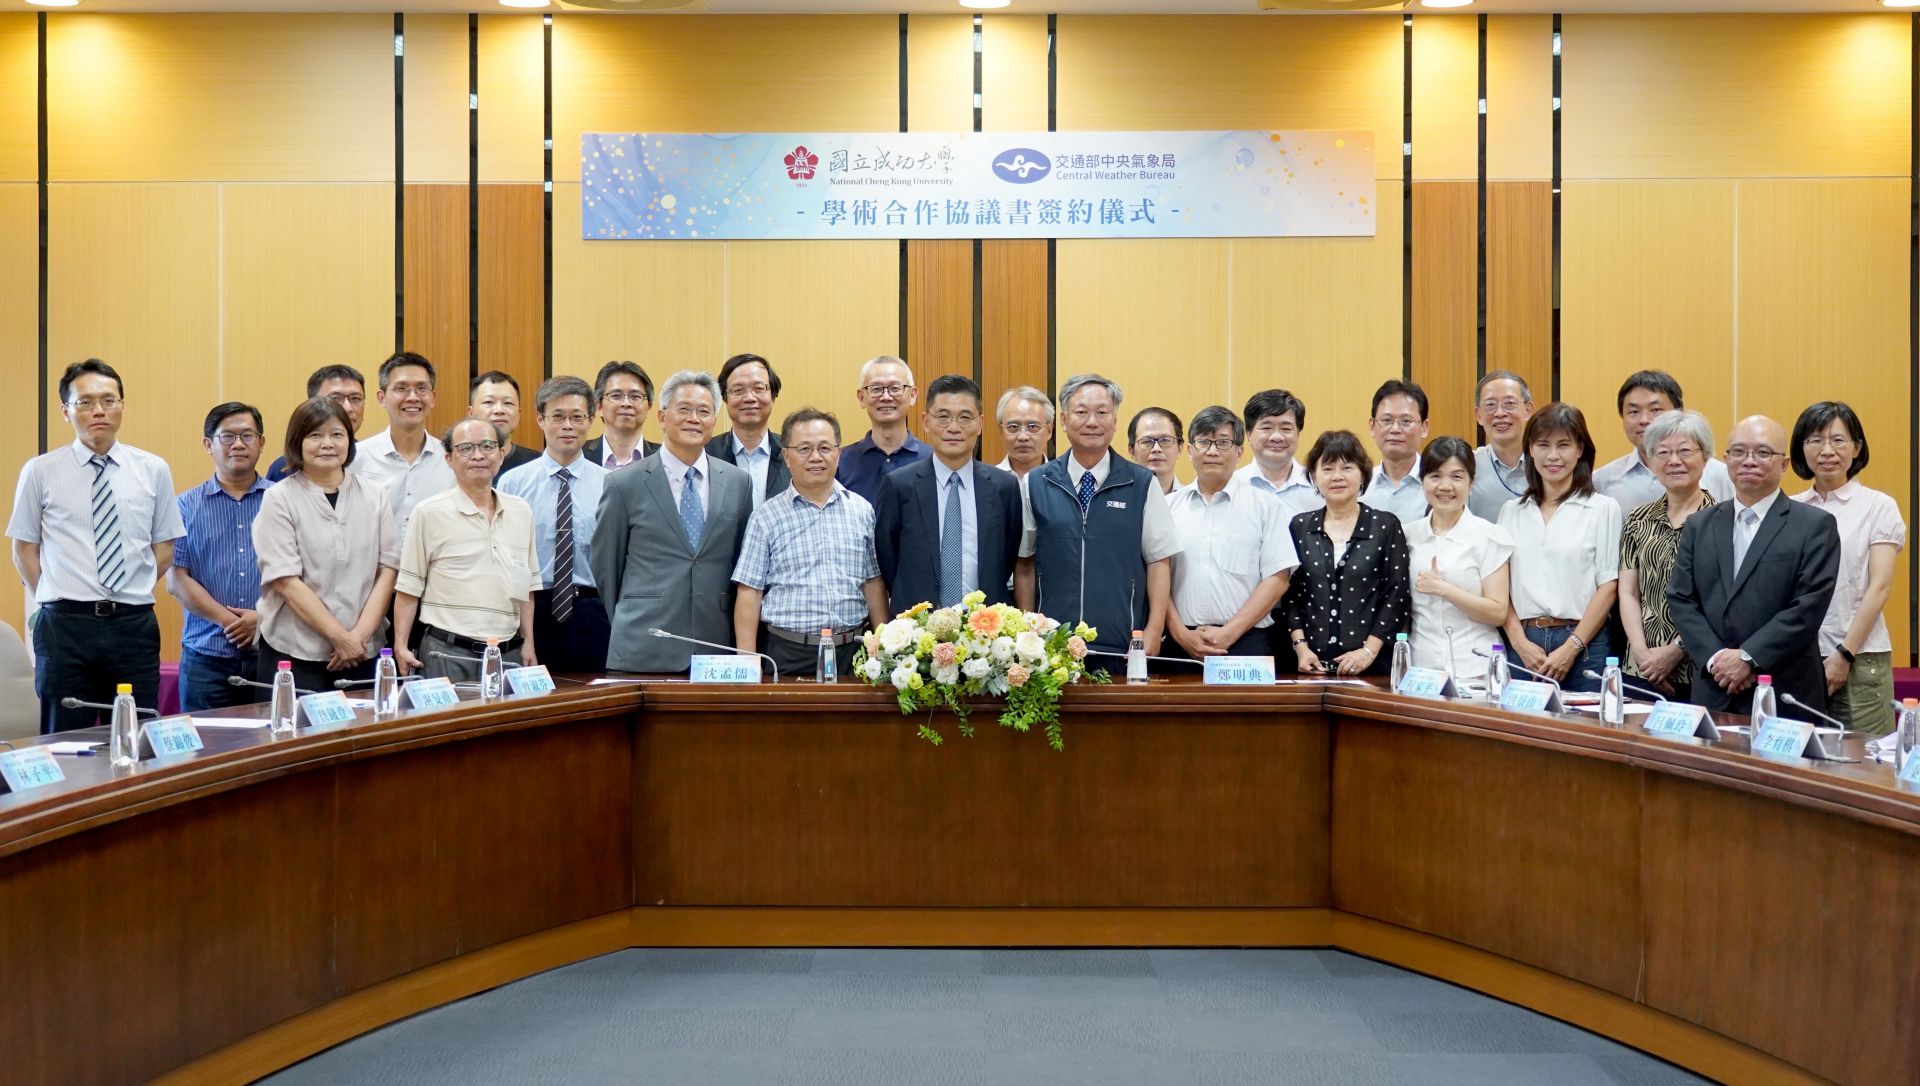 NCKU and the Central Weather Bureau signed an MOU for academic research exchange and talent development